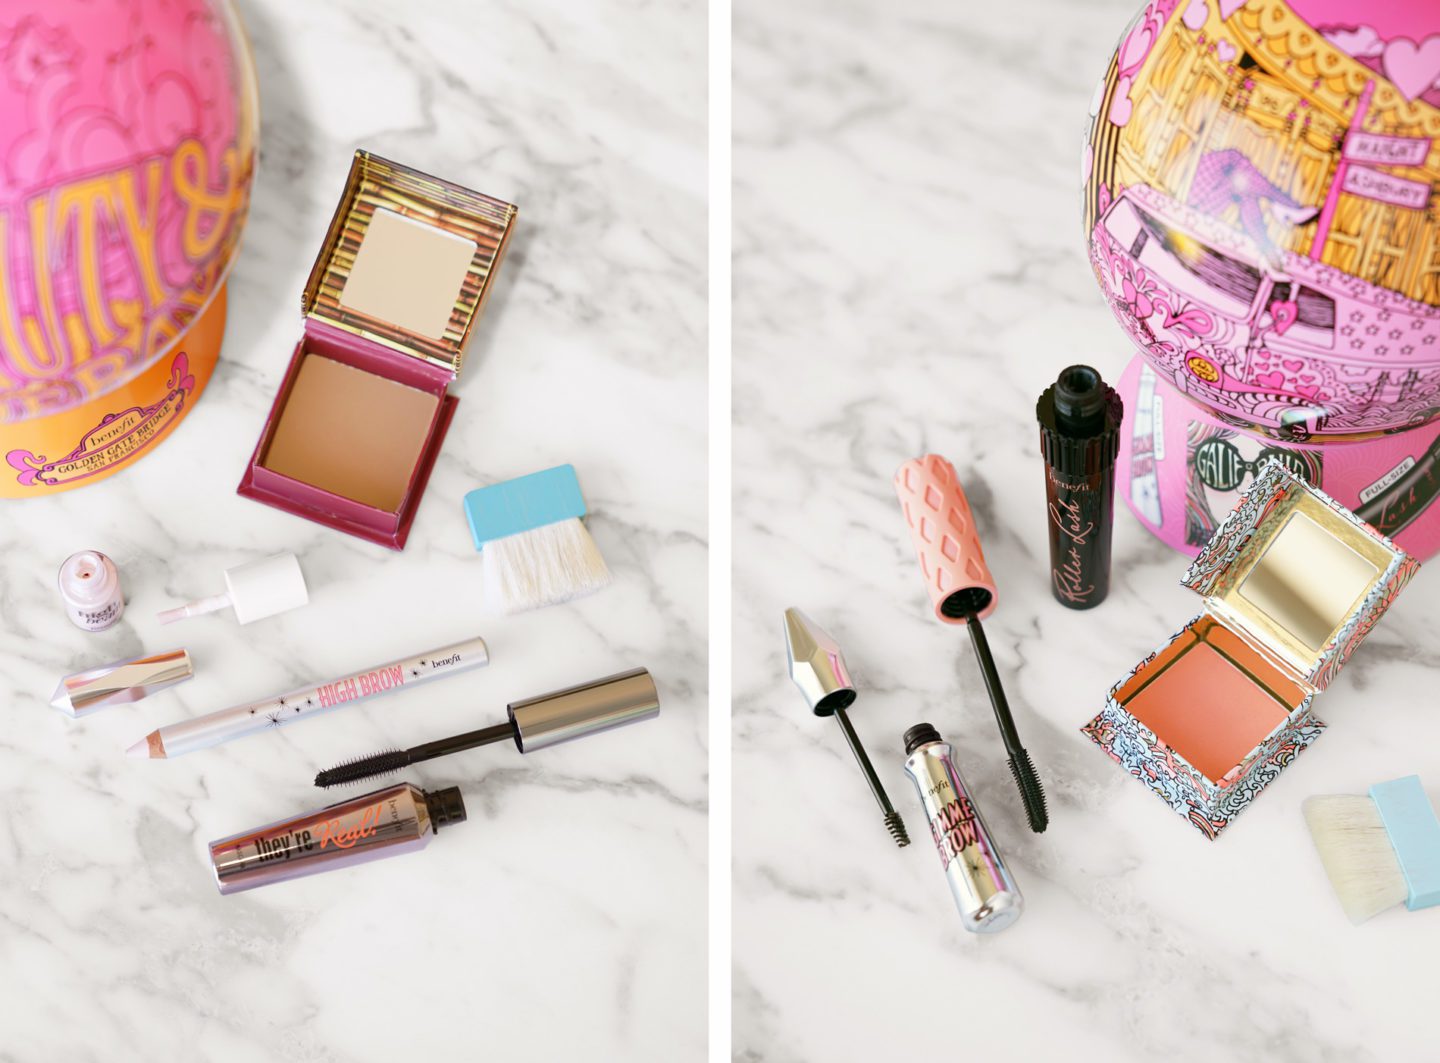 Ulta Benefit Sets Beauty and the Bay and GALifornia Love